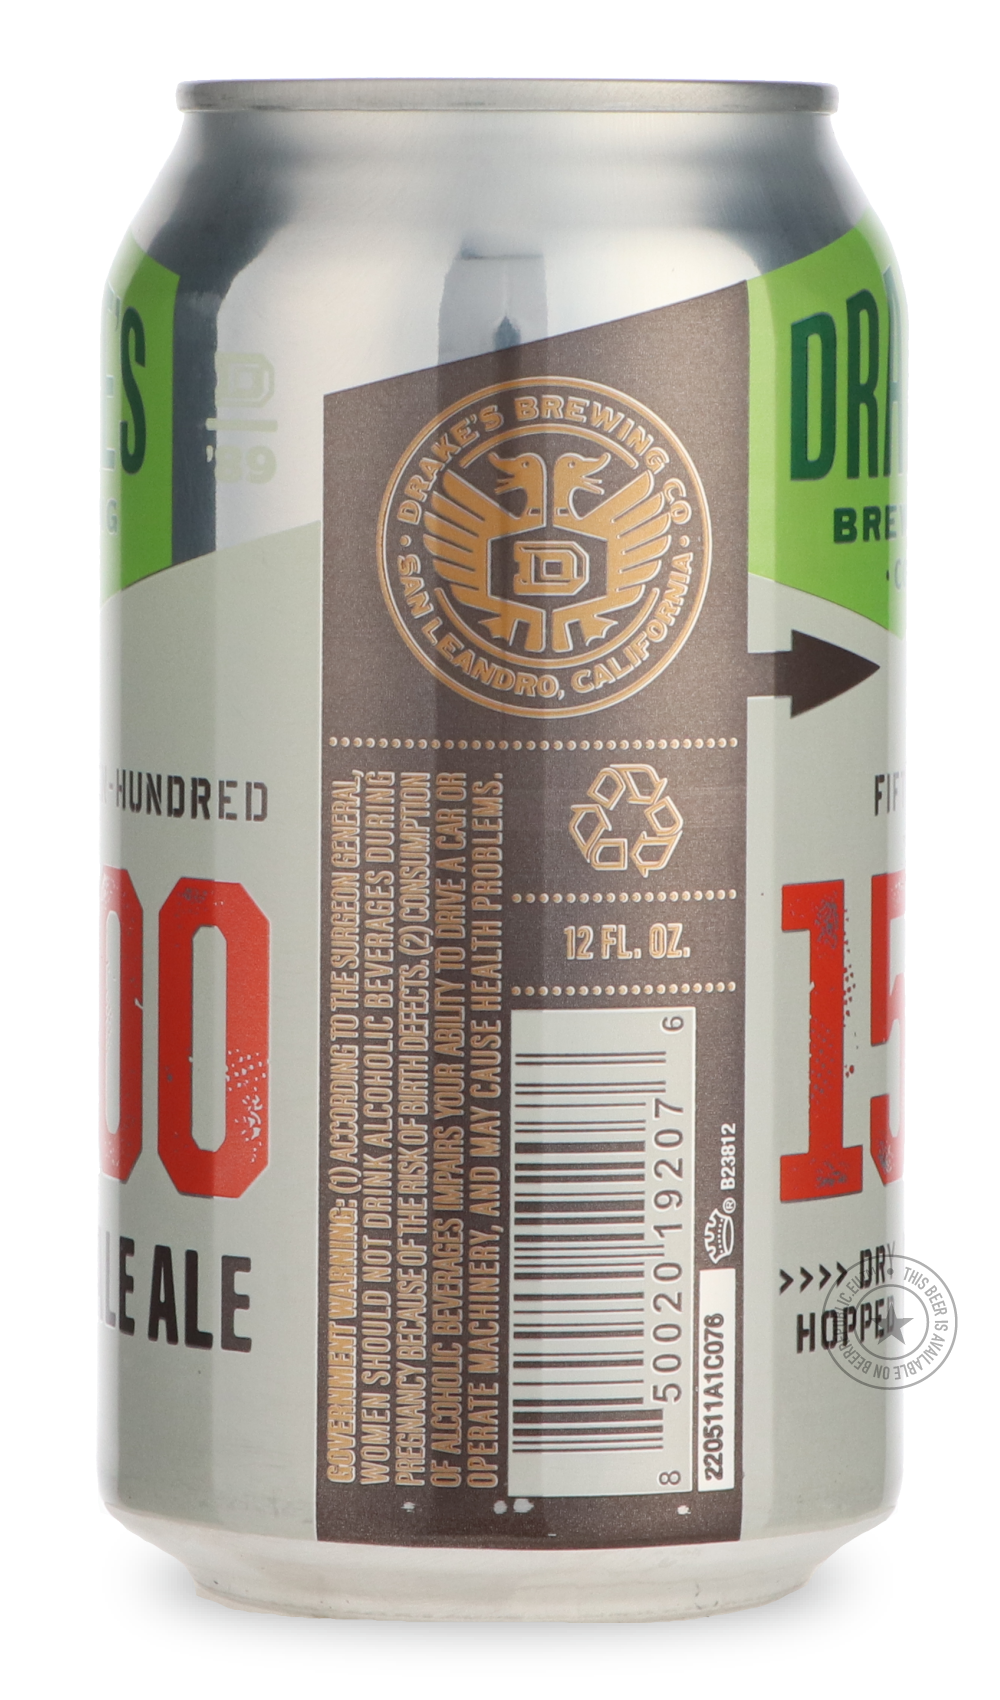 -Drake's- 1500-Pale- Only @ Beer Republic - The best online beer store for American & Canadian craft beer - Buy beer online from the USA and Canada - Bier online kopen - Amerikaans bier kopen - Craft beer store - Craft beer kopen - Amerikanisch bier kaufen - Bier online kaufen - Acheter biere online - IPA - Stout - Porter - New England IPA - Hazy IPA - Imperial Stout - Barrel Aged - Barrel Aged Imperial Stout - Brown - Dark beer - Blond - Blonde - Pilsner - Lager - Wheat - Weizen - Amber - Barley Wine - Qua